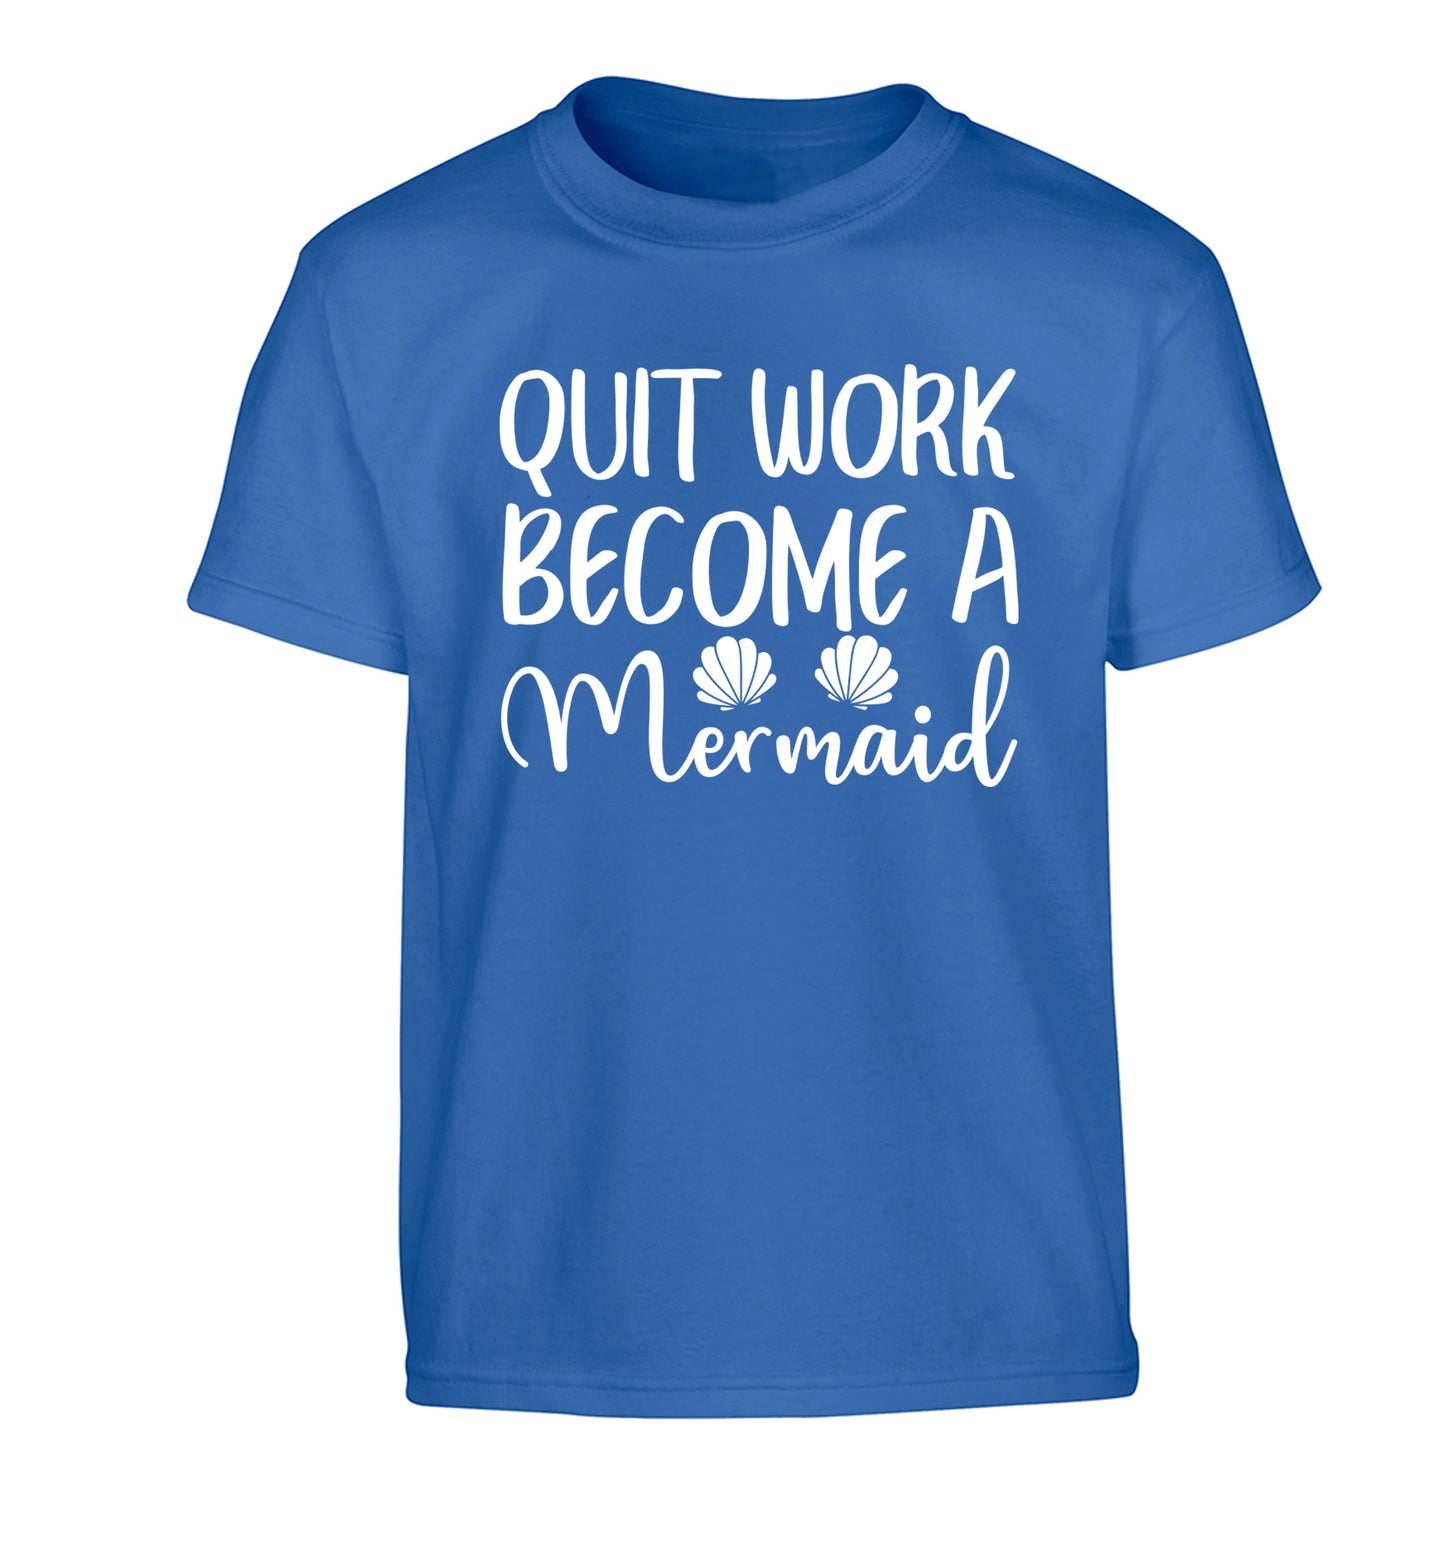 Quit work become a mermaid Children's blue Tshirt 12-13 Years